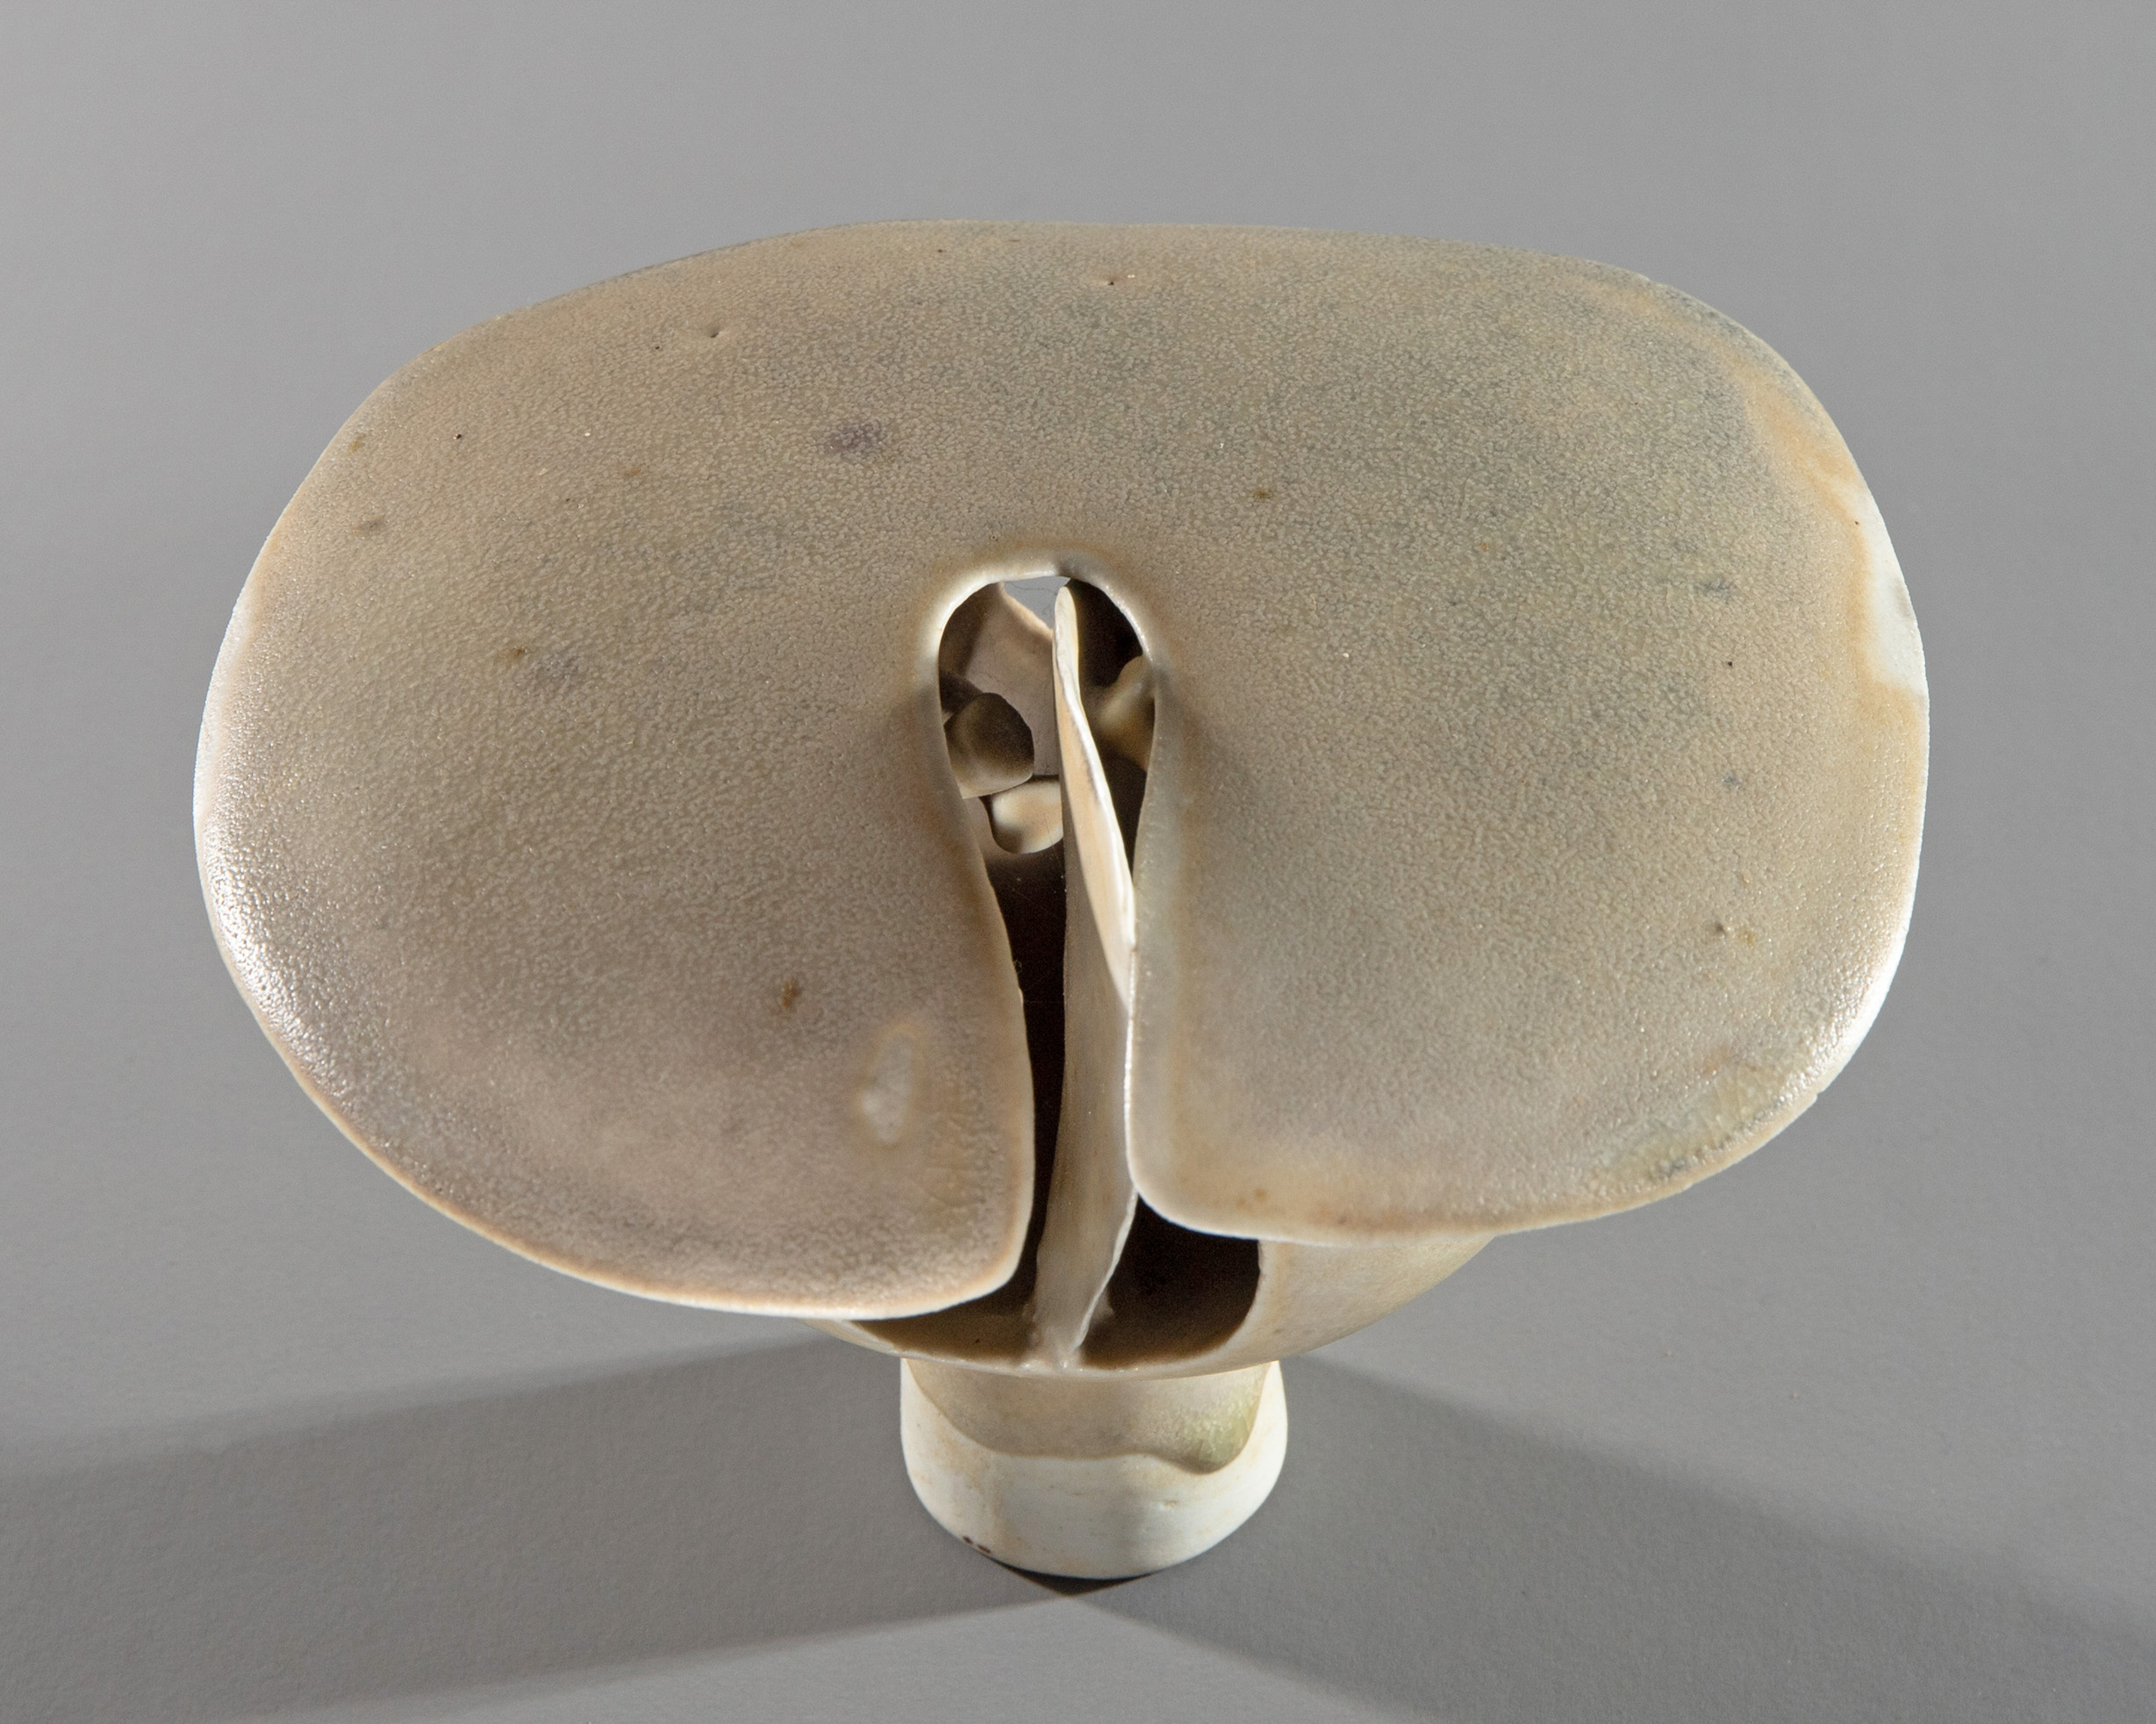 Ruth Duckworth, small sculpture, ca. 1989 - Image 2 of 6